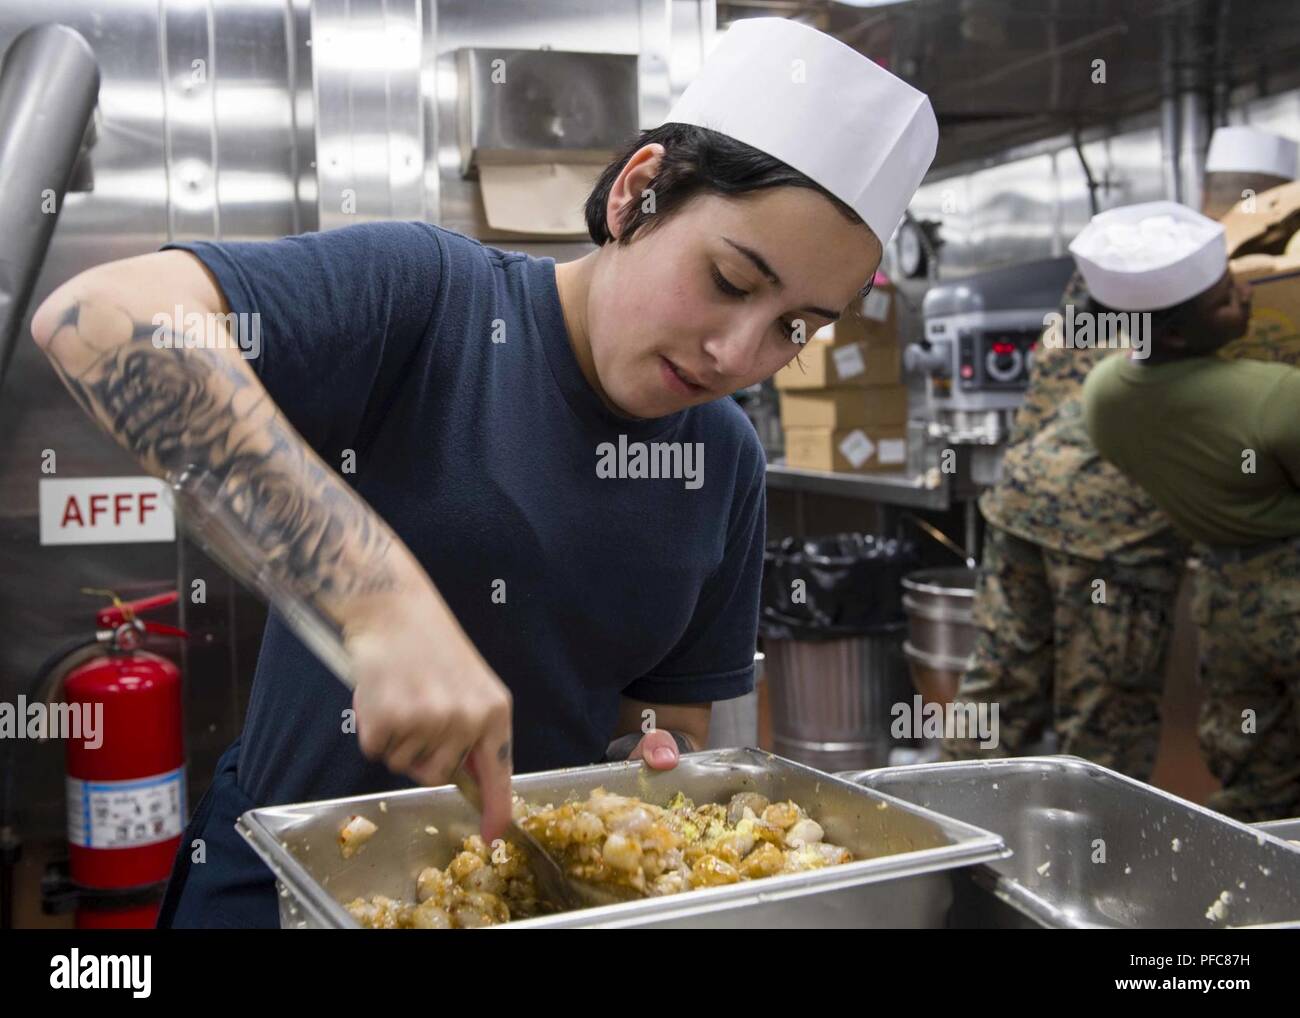 PACIFIC OCEAN (June 7, 2018) Culinary Specialist 3rd Class Elaine Nassar, from Uniontown, Pa., prepares a meal for the crew of San Antonio-class amphibious transport dock USS Anchorage (LPD 23) during composite training unit exercise (COMPTUEX). COMPTUEX is the final pre-deployment exercise which certifies the combined Essex Amphibious Ready Group and the 13th Marine Expeditionary Unit’s abilities to conduct military operations at sea and project power ashore during their upcoming deployment in summer of 2018. Stock Photo